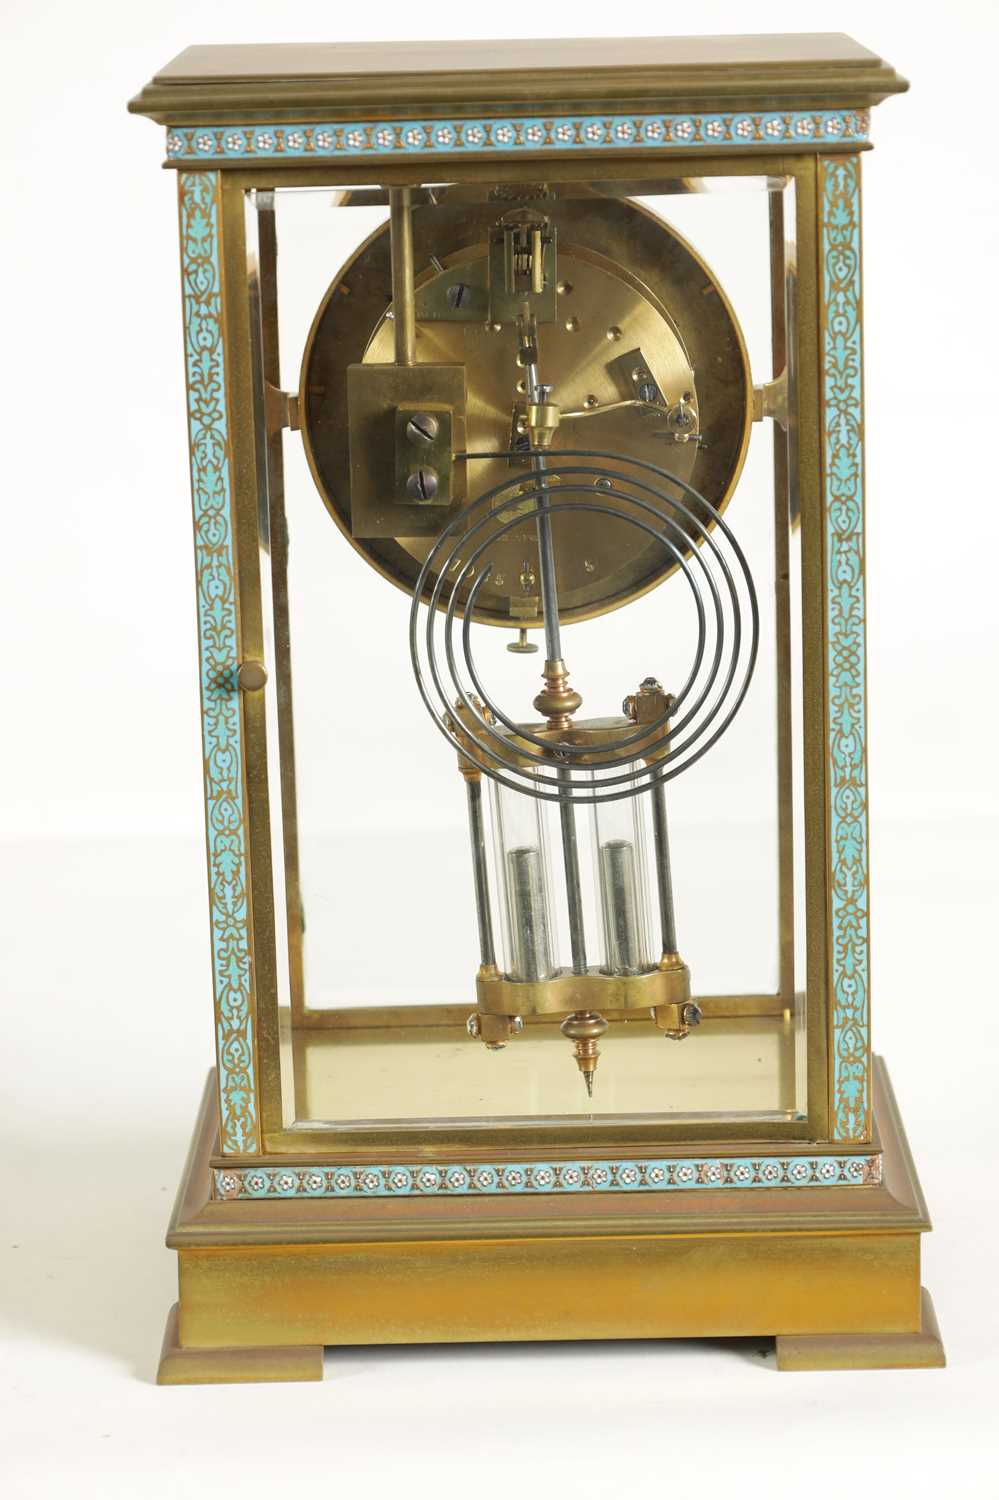 A LATE 19TH CENTURY FRENCH BRASS AND CHAMPLEVE ENAMEL FOUR-GLASS MANTEL CLOCK - Image 8 of 10